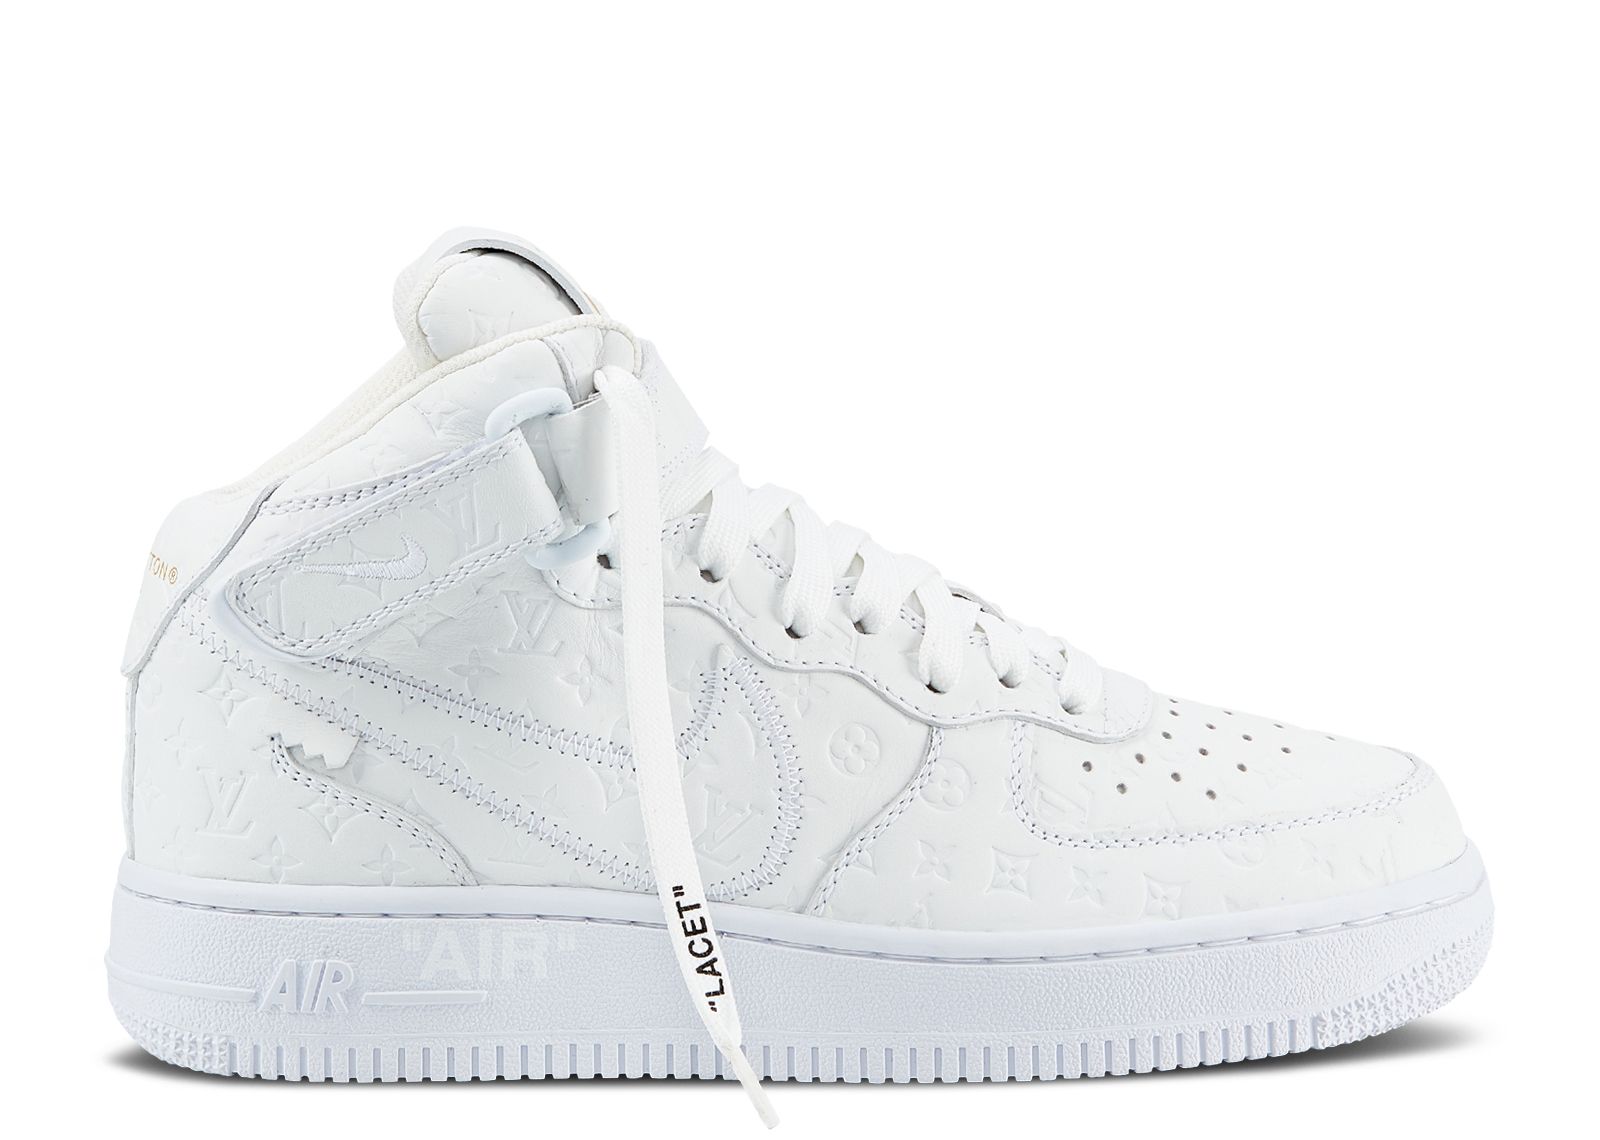 lv air forces price